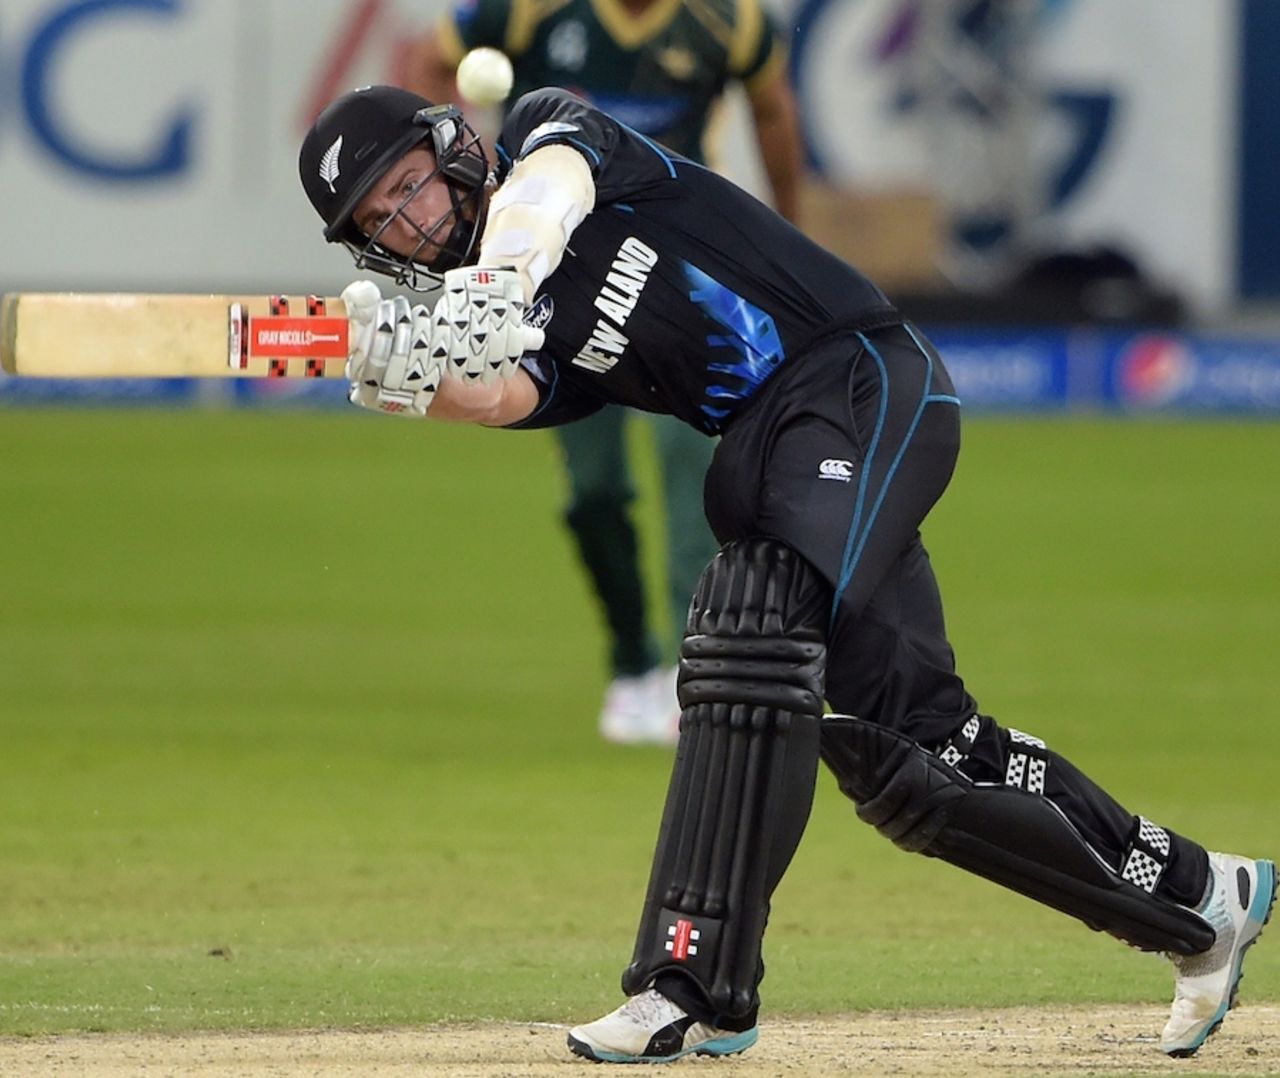 Kane Williamson played some attractive shots during his stay, Pakistan v New Zealand, 2nd T20I, Dubai, December 5, 2014